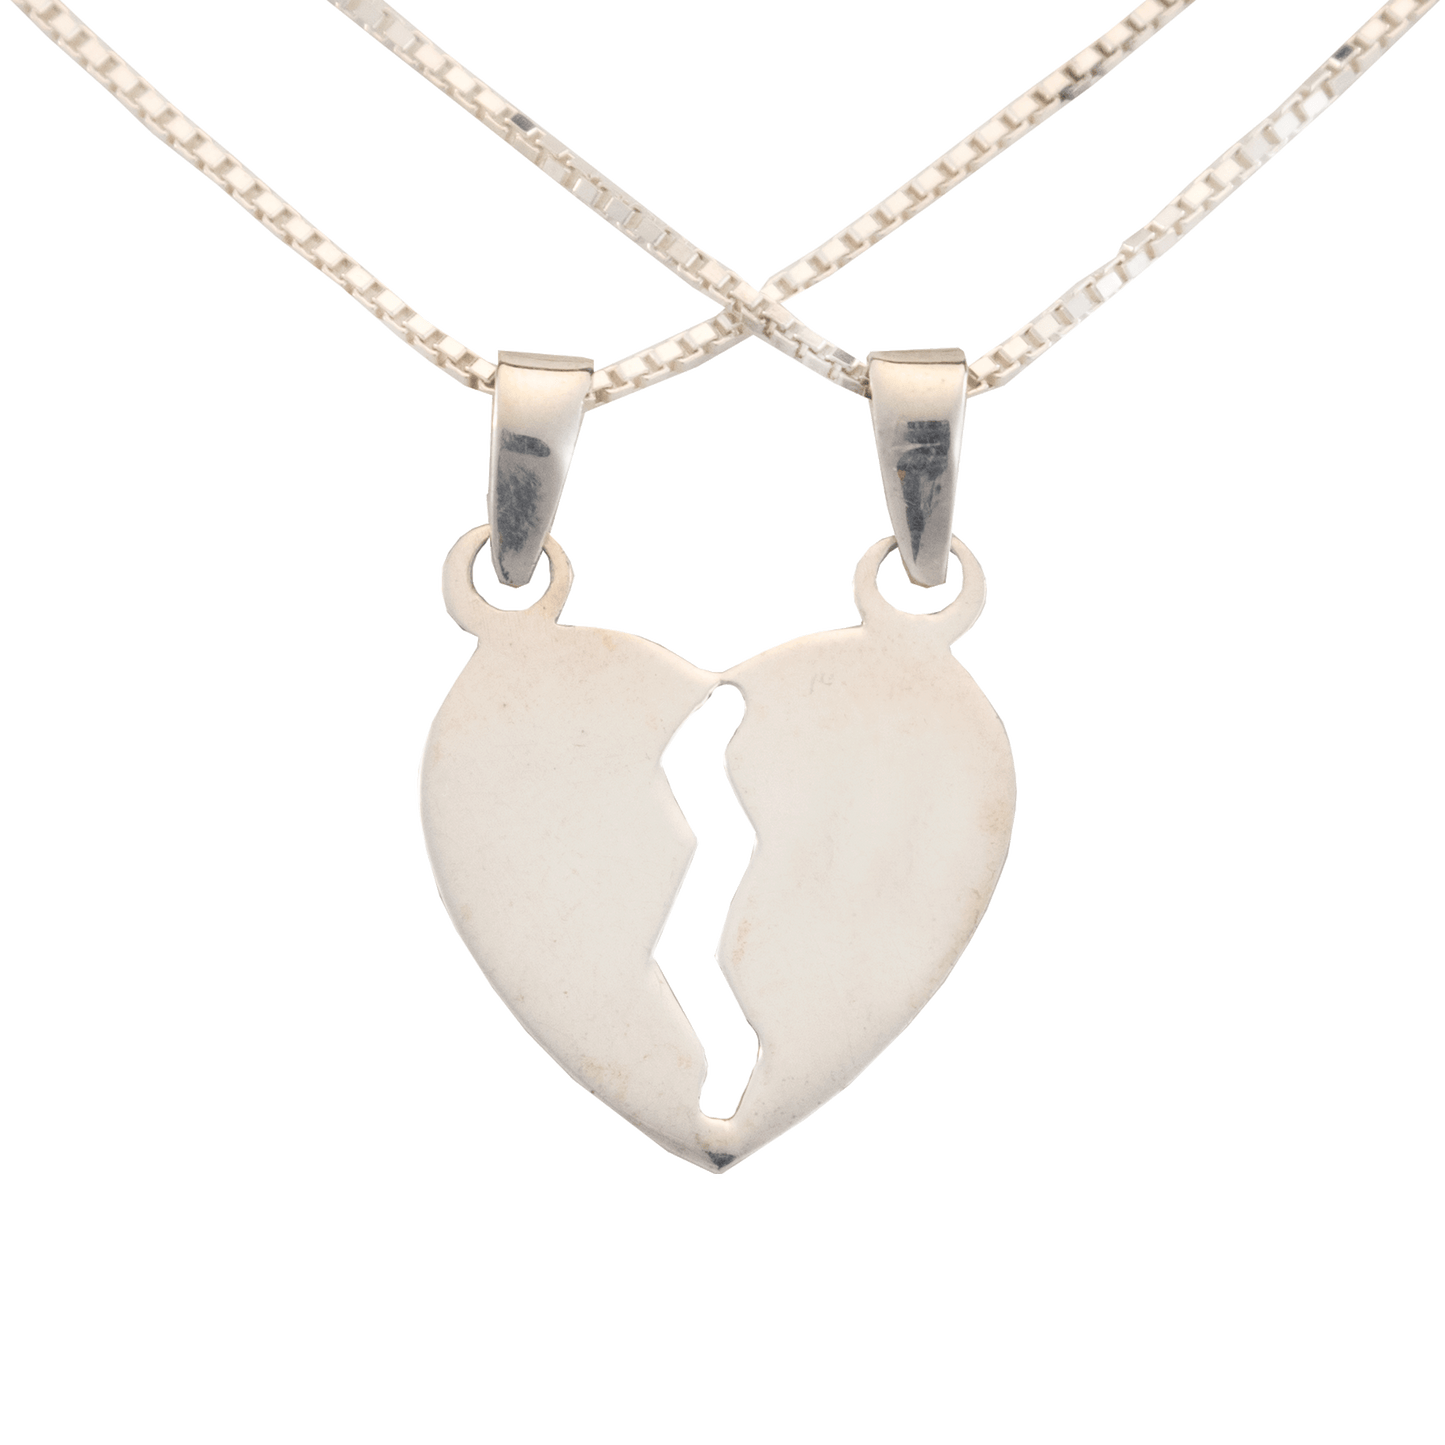 Broken Heart Layered Chain Necklace